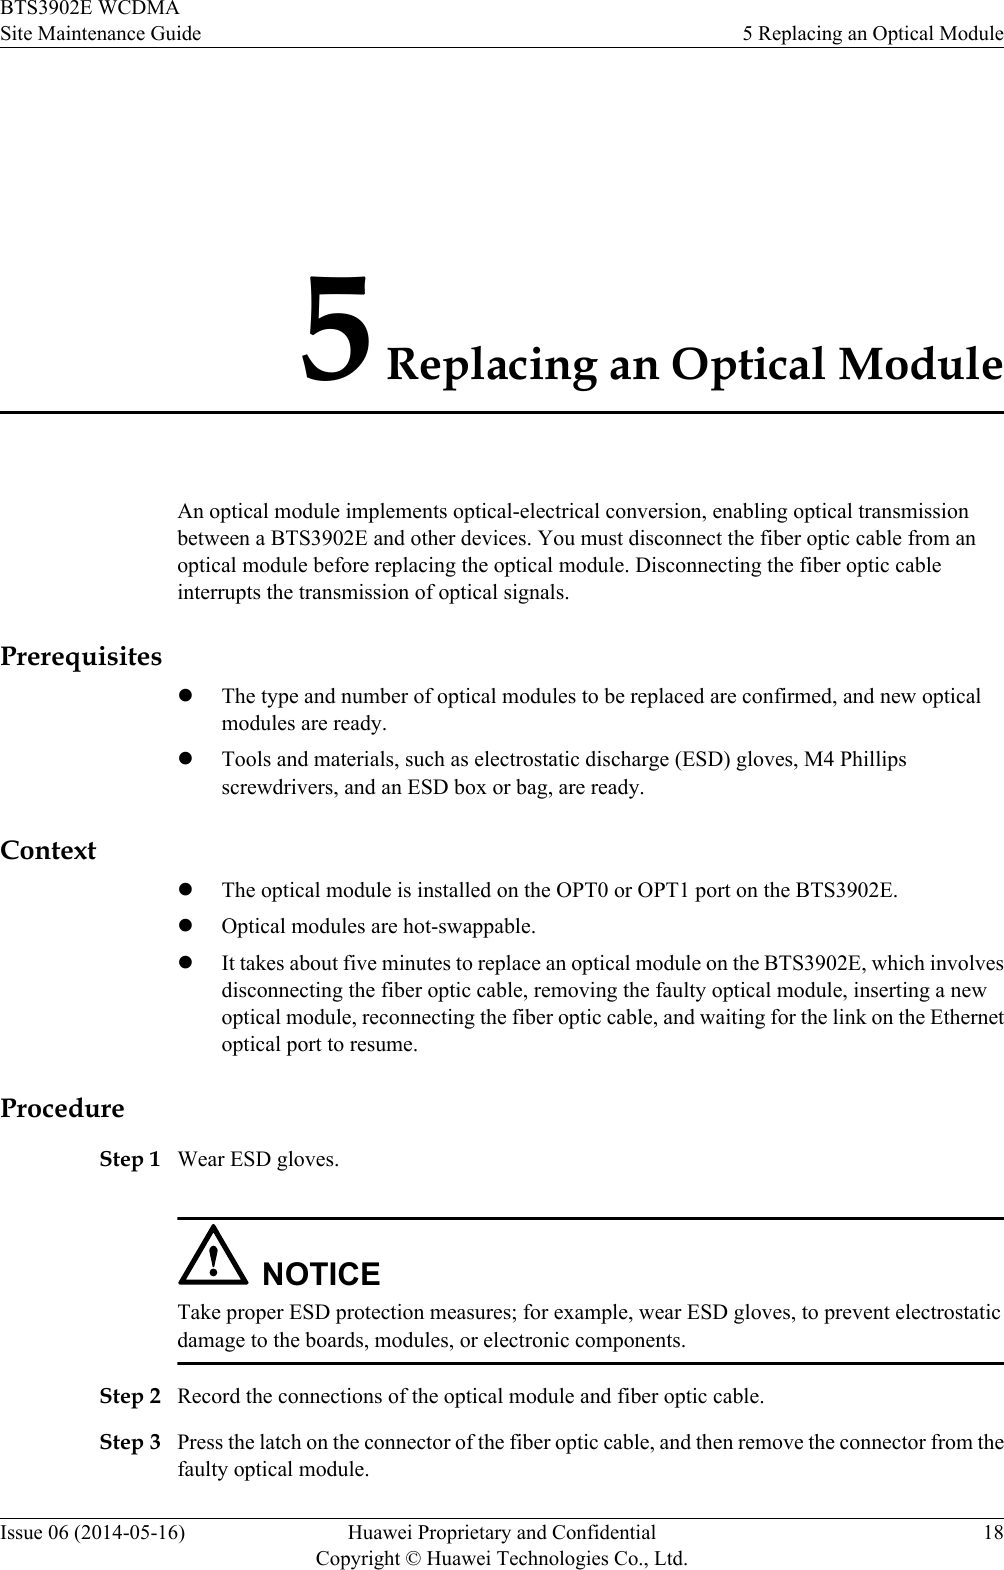 5 Replacing an Optical ModuleAn optical module implements optical-electrical conversion, enabling optical transmissionbetween a BTS3902E and other devices. You must disconnect the fiber optic cable from anoptical module before replacing the optical module. Disconnecting the fiber optic cableinterrupts the transmission of optical signals.PrerequisiteslThe type and number of optical modules to be replaced are confirmed, and new opticalmodules are ready.lTools and materials, such as electrostatic discharge (ESD) gloves, M4 Phillipsscrewdrivers, and an ESD box or bag, are ready.ContextlThe optical module is installed on the OPT0 or OPT1 port on the BTS3902E.lOptical modules are hot-swappable.lIt takes about five minutes to replace an optical module on the BTS3902E, which involvesdisconnecting the fiber optic cable, removing the faulty optical module, inserting a newoptical module, reconnecting the fiber optic cable, and waiting for the link on the Ethernetoptical port to resume.ProcedureStep 1 Wear ESD gloves.NOTICETake proper ESD protection measures; for example, wear ESD gloves, to prevent electrostaticdamage to the boards, modules, or electronic components.Step 2 Record the connections of the optical module and fiber optic cable.Step 3 Press the latch on the connector of the fiber optic cable, and then remove the connector from thefaulty optical module.BTS3902E WCDMASite Maintenance Guide 5 Replacing an Optical ModuleIssue 06 (2014-05-16) Huawei Proprietary and ConfidentialCopyright © Huawei Technologies Co., Ltd.18